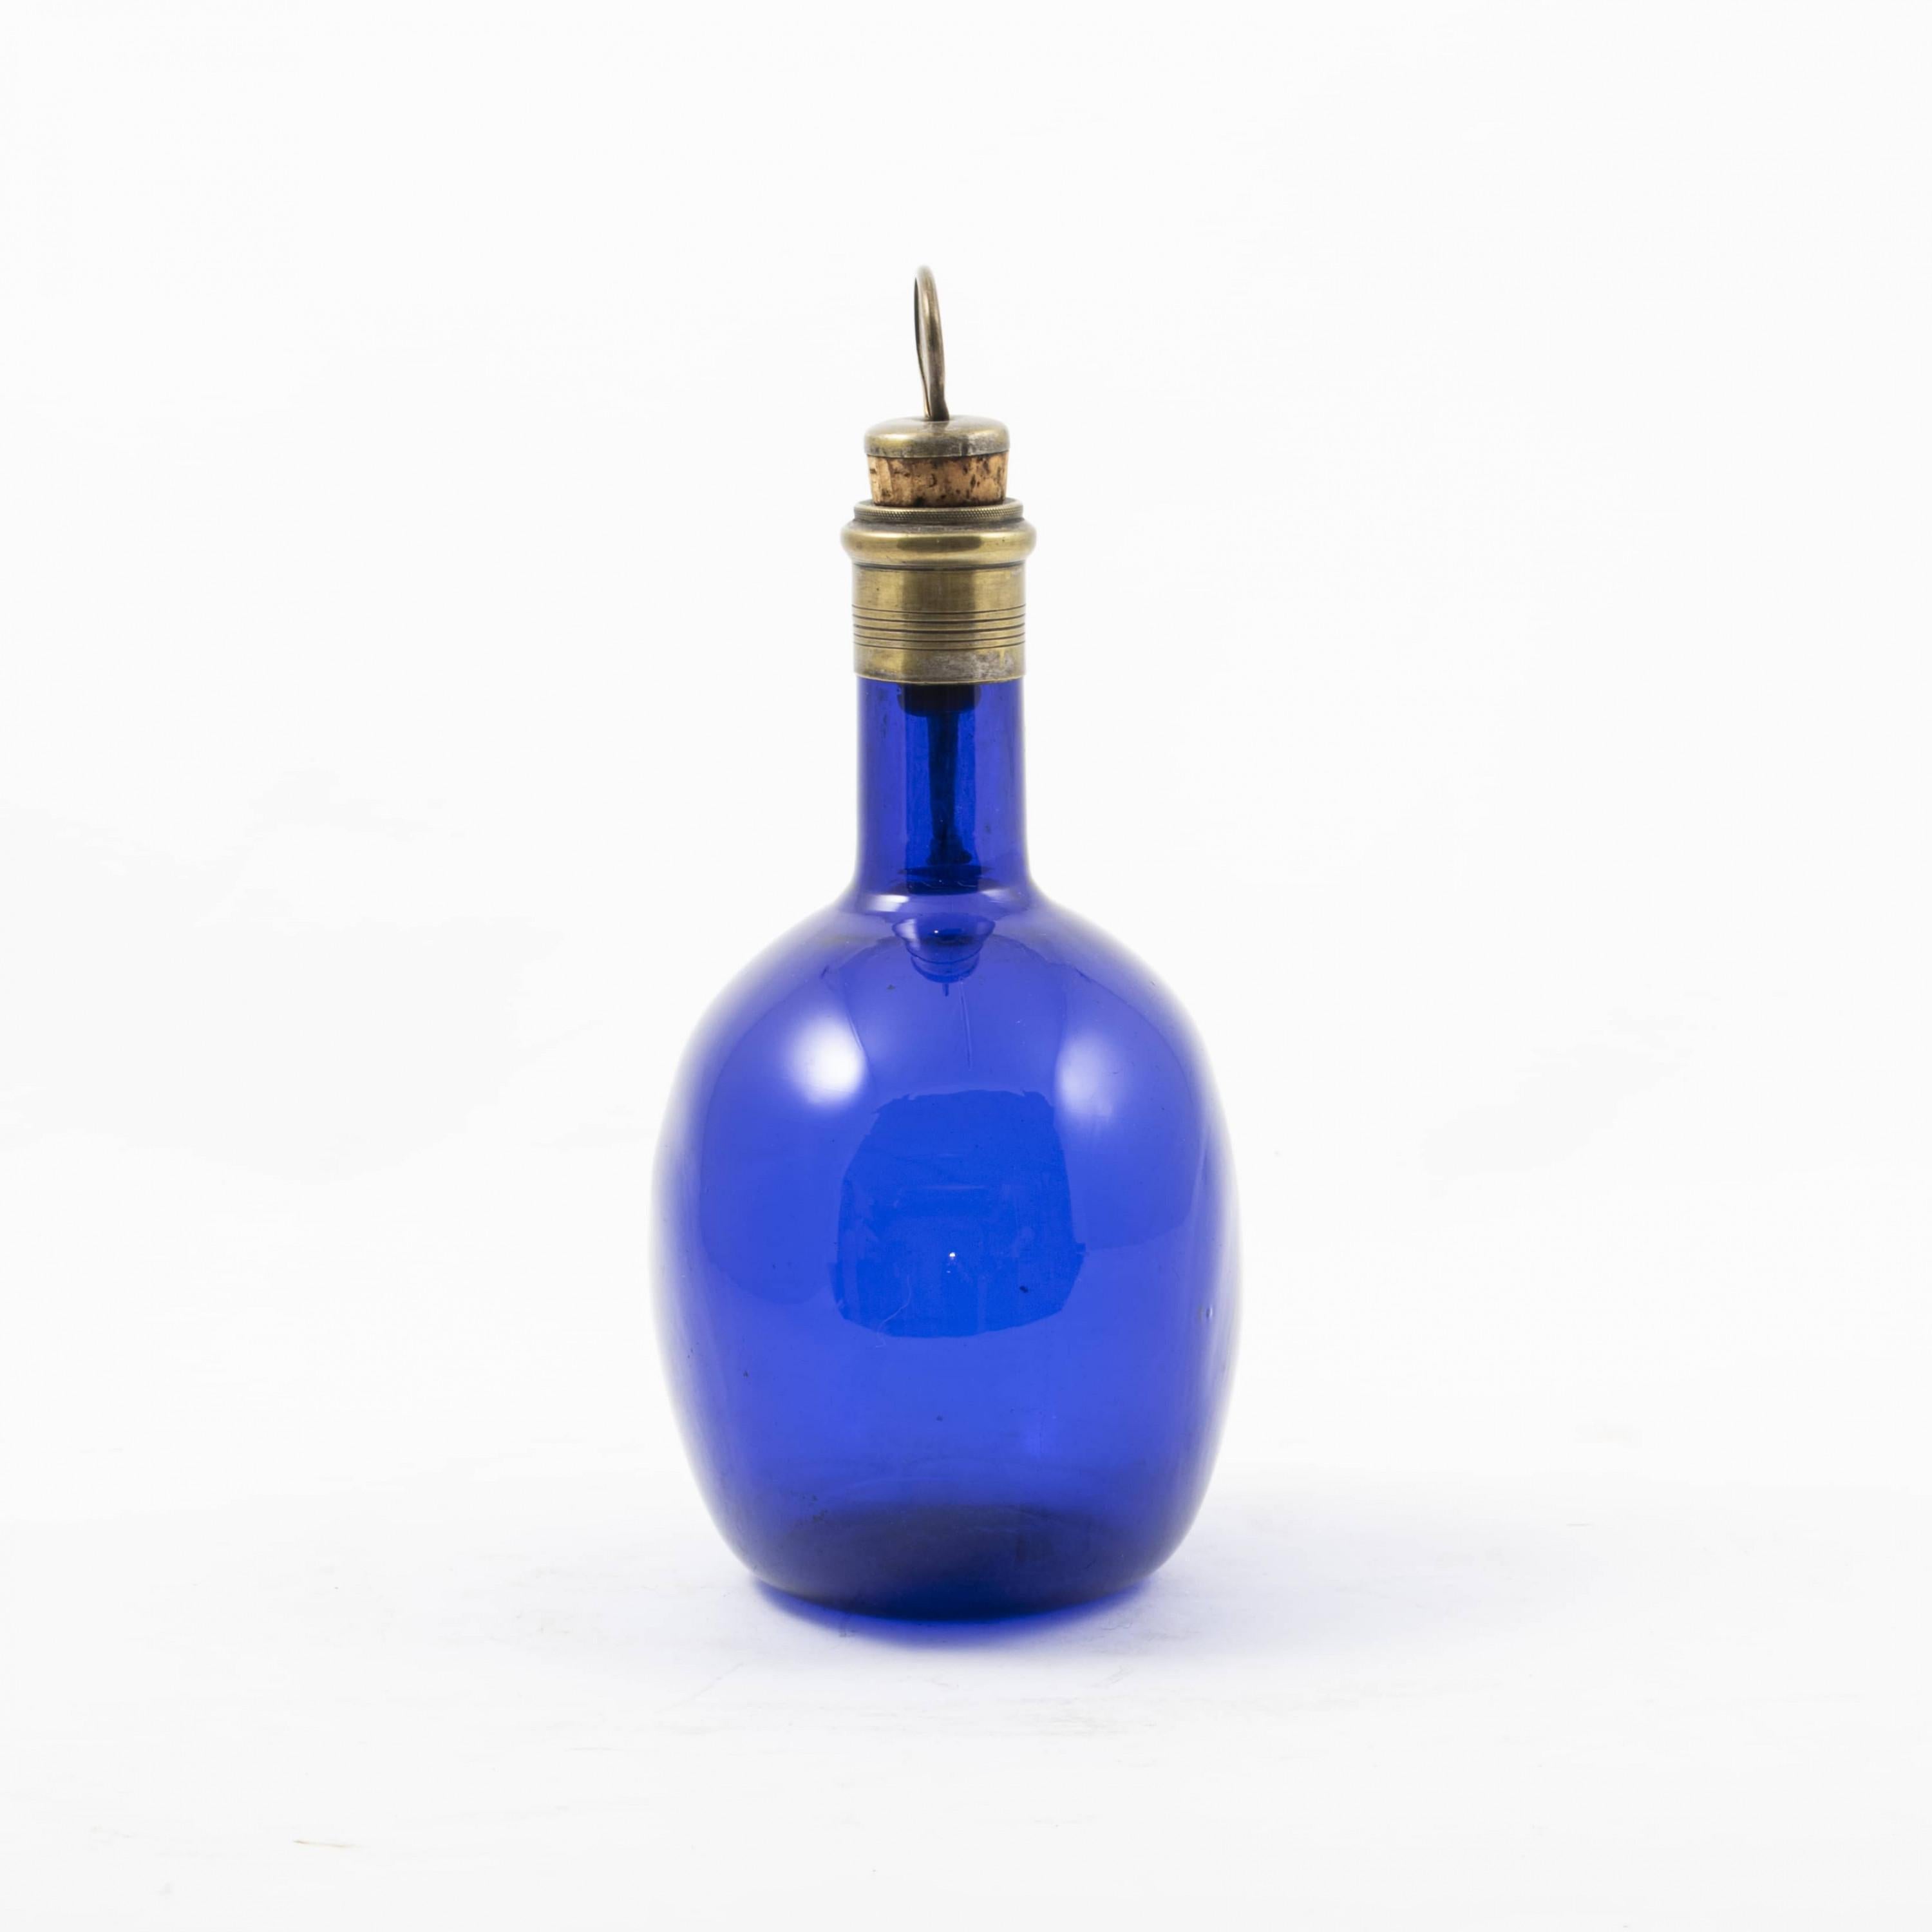 Small elegant regency cognac decanter.
Blue oval glass body with bronze neck and handle in the shape of a crane. Original stopper with mother-of-pearl 